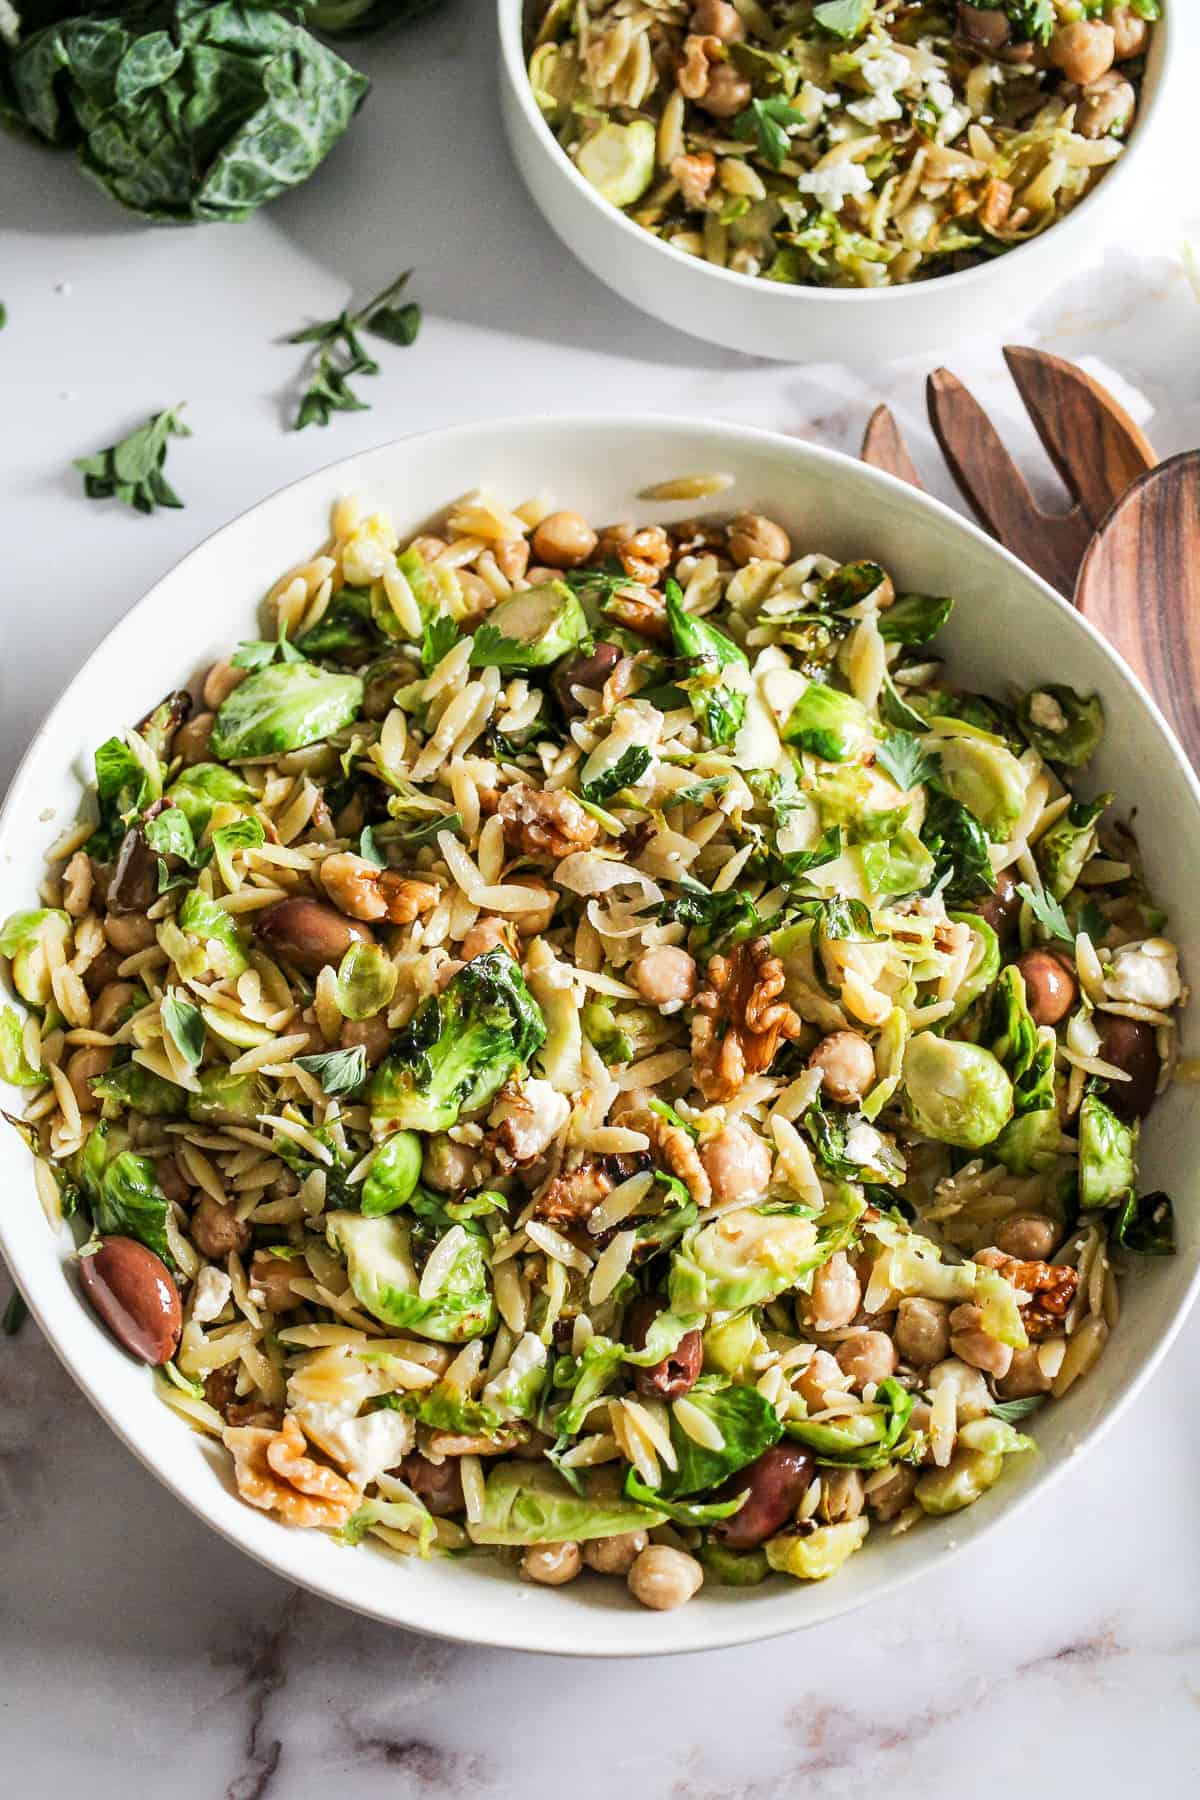 Vegetarian orzo pasta salad with brussels sprouts